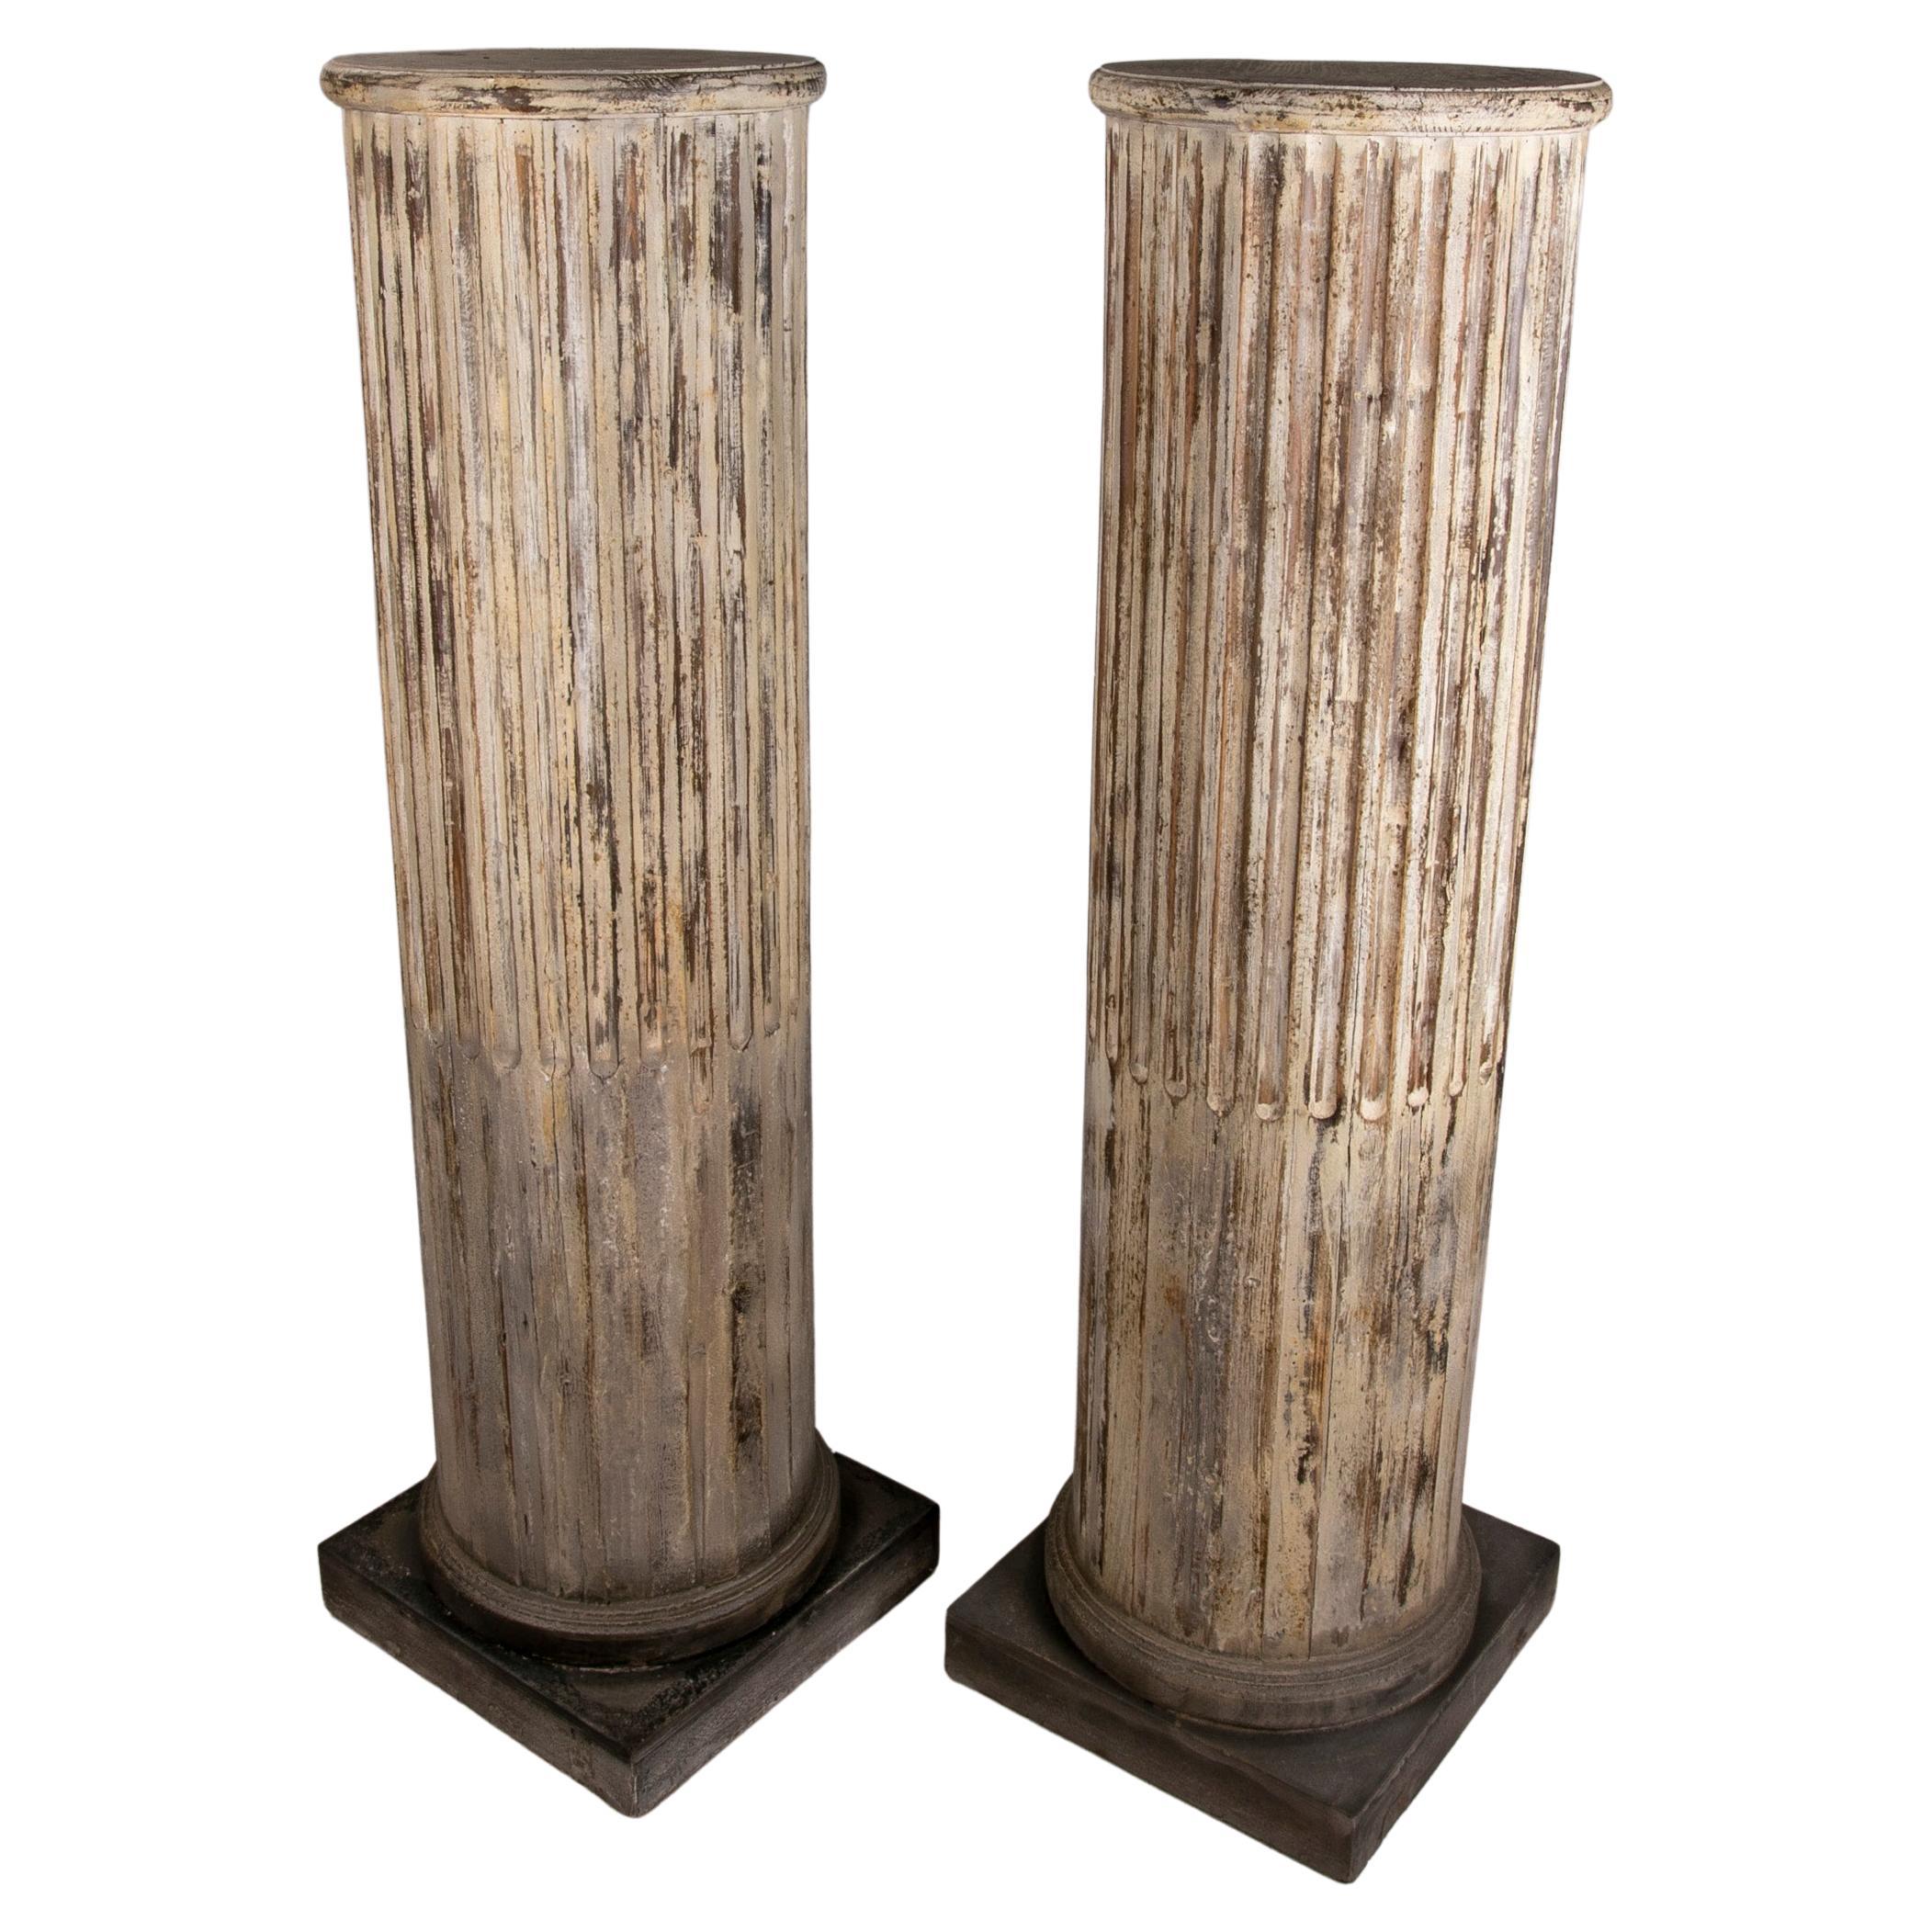 Pair of Resin Imitation Wooden Stands with Antique Style Finish